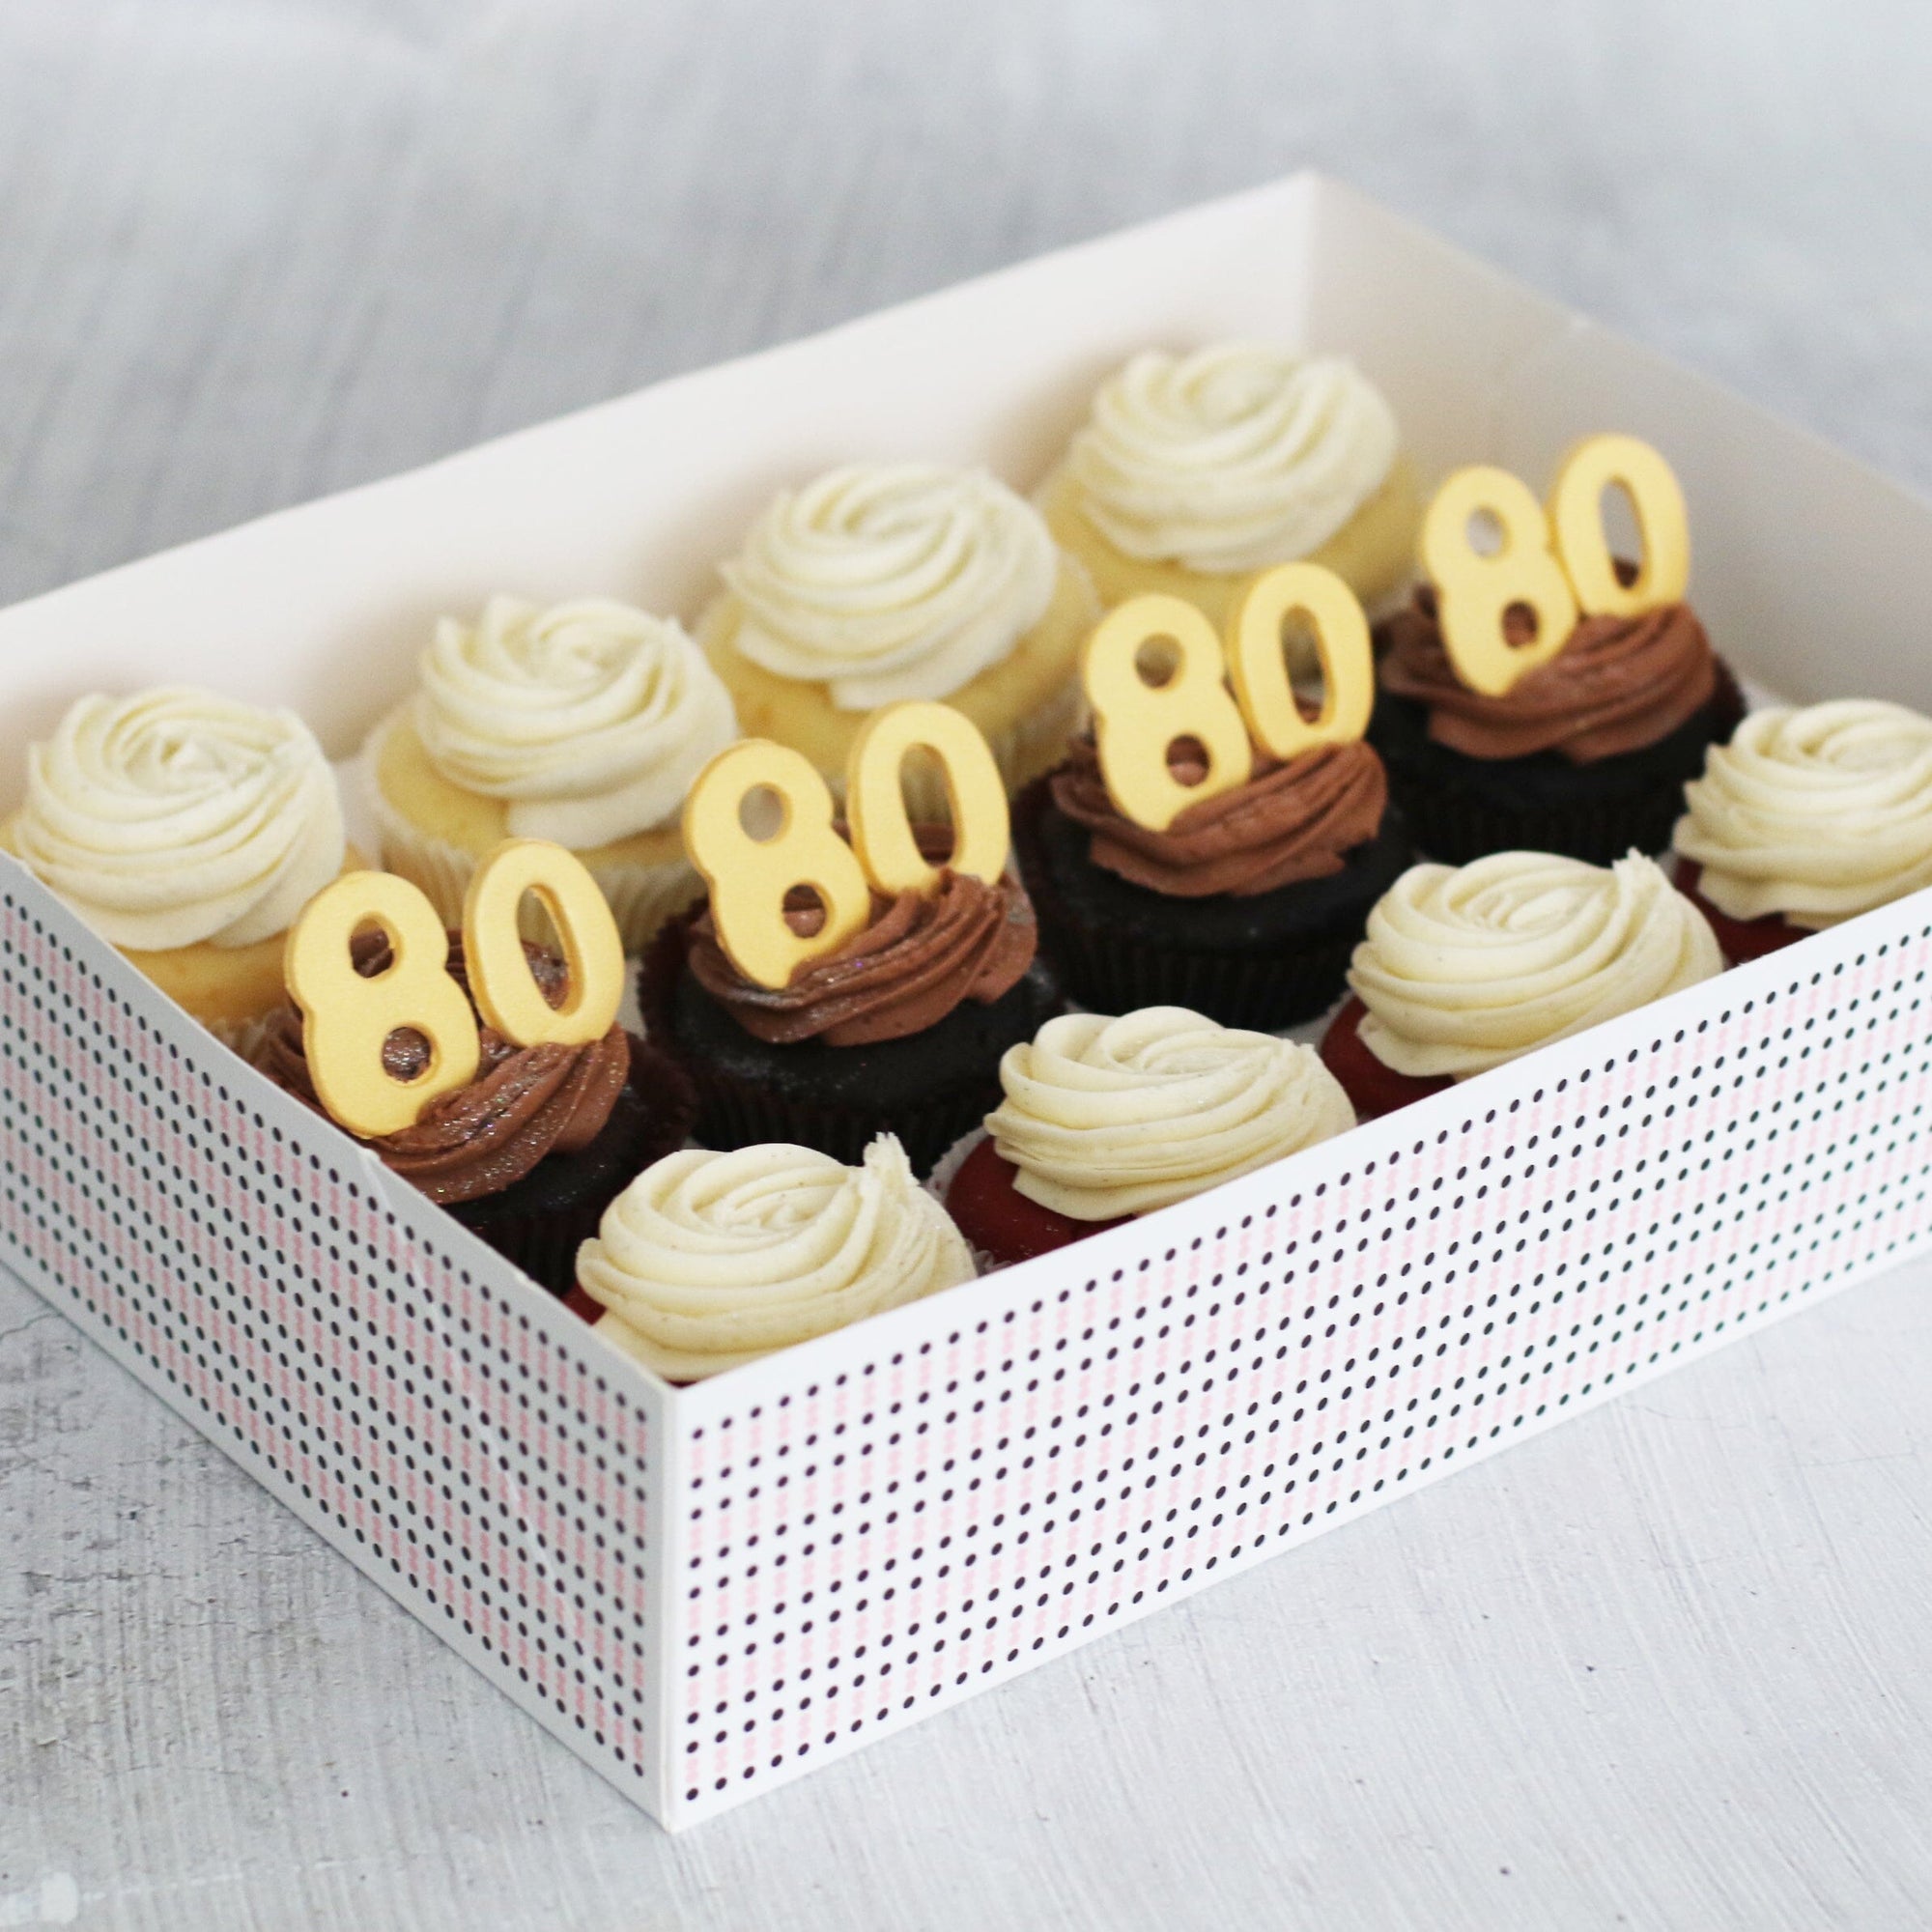 80th Birthday Cupcakes in GOLD Cupcakes The Cupcake Queens 